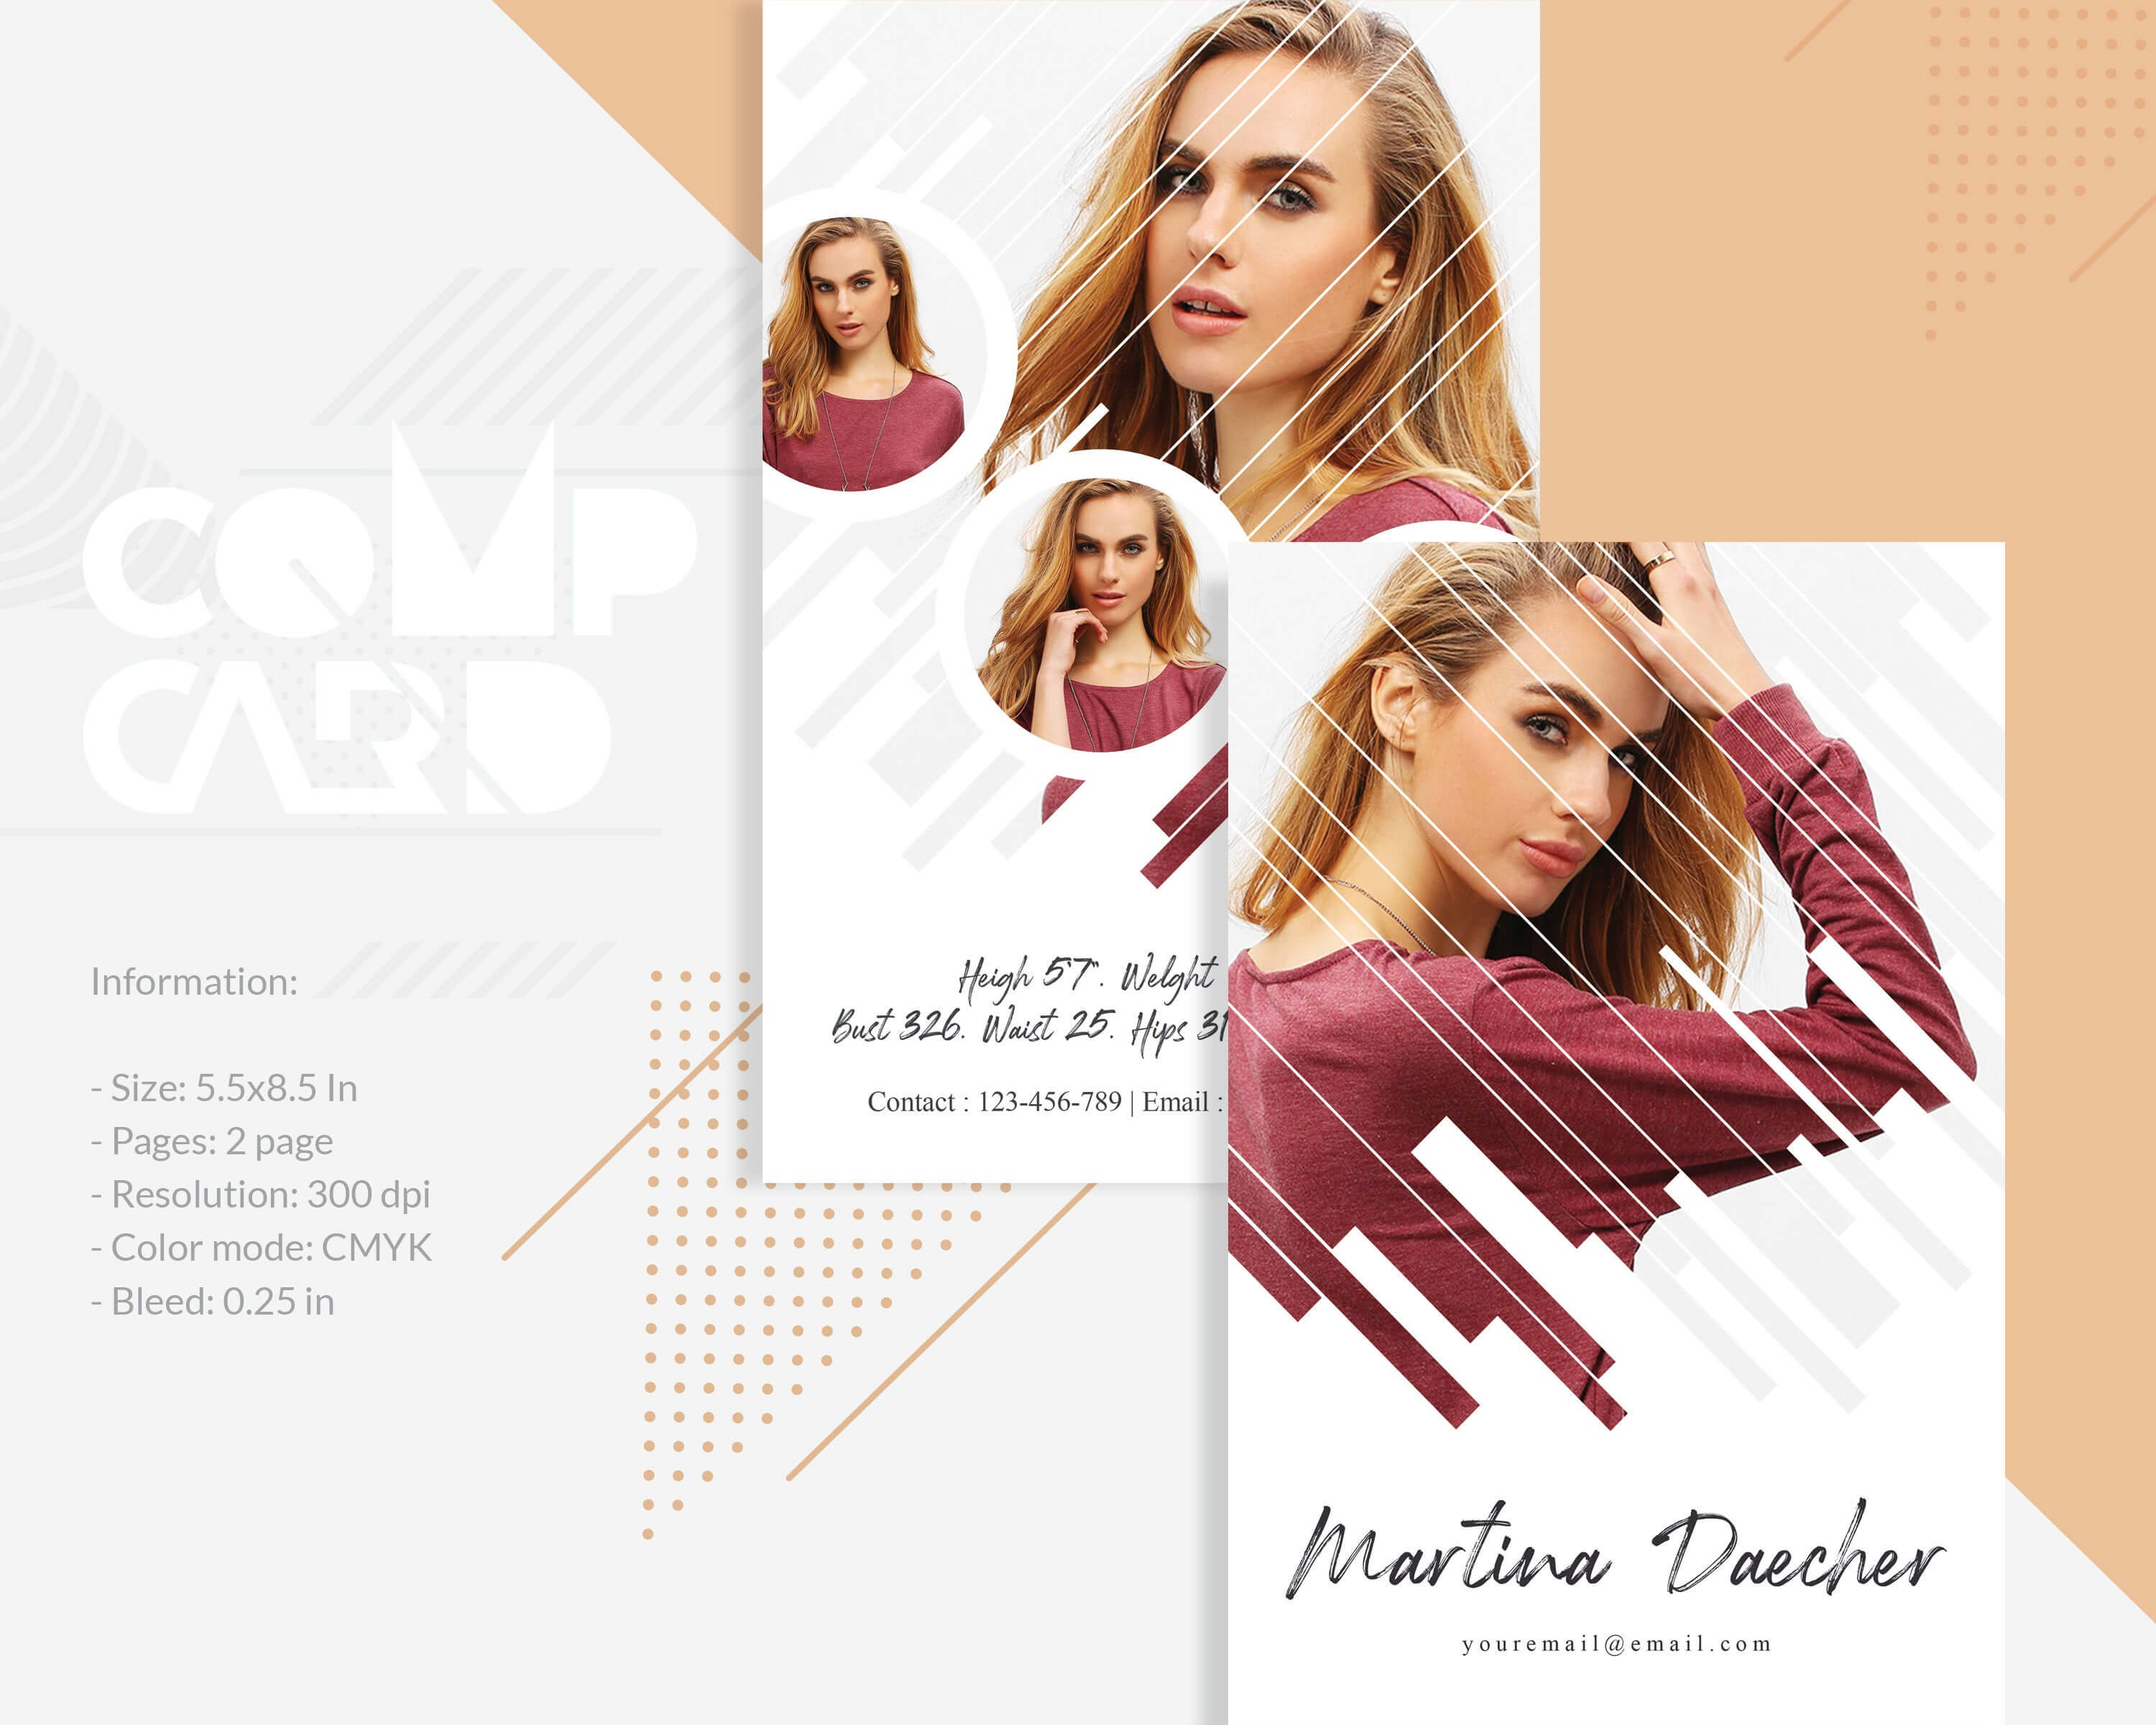 Model Comp Card Template | Modeling Comp Card | Fashion Card | Ms Word,  Photoshop And Elements Template | Instant Download Inside Download Comp Card Template